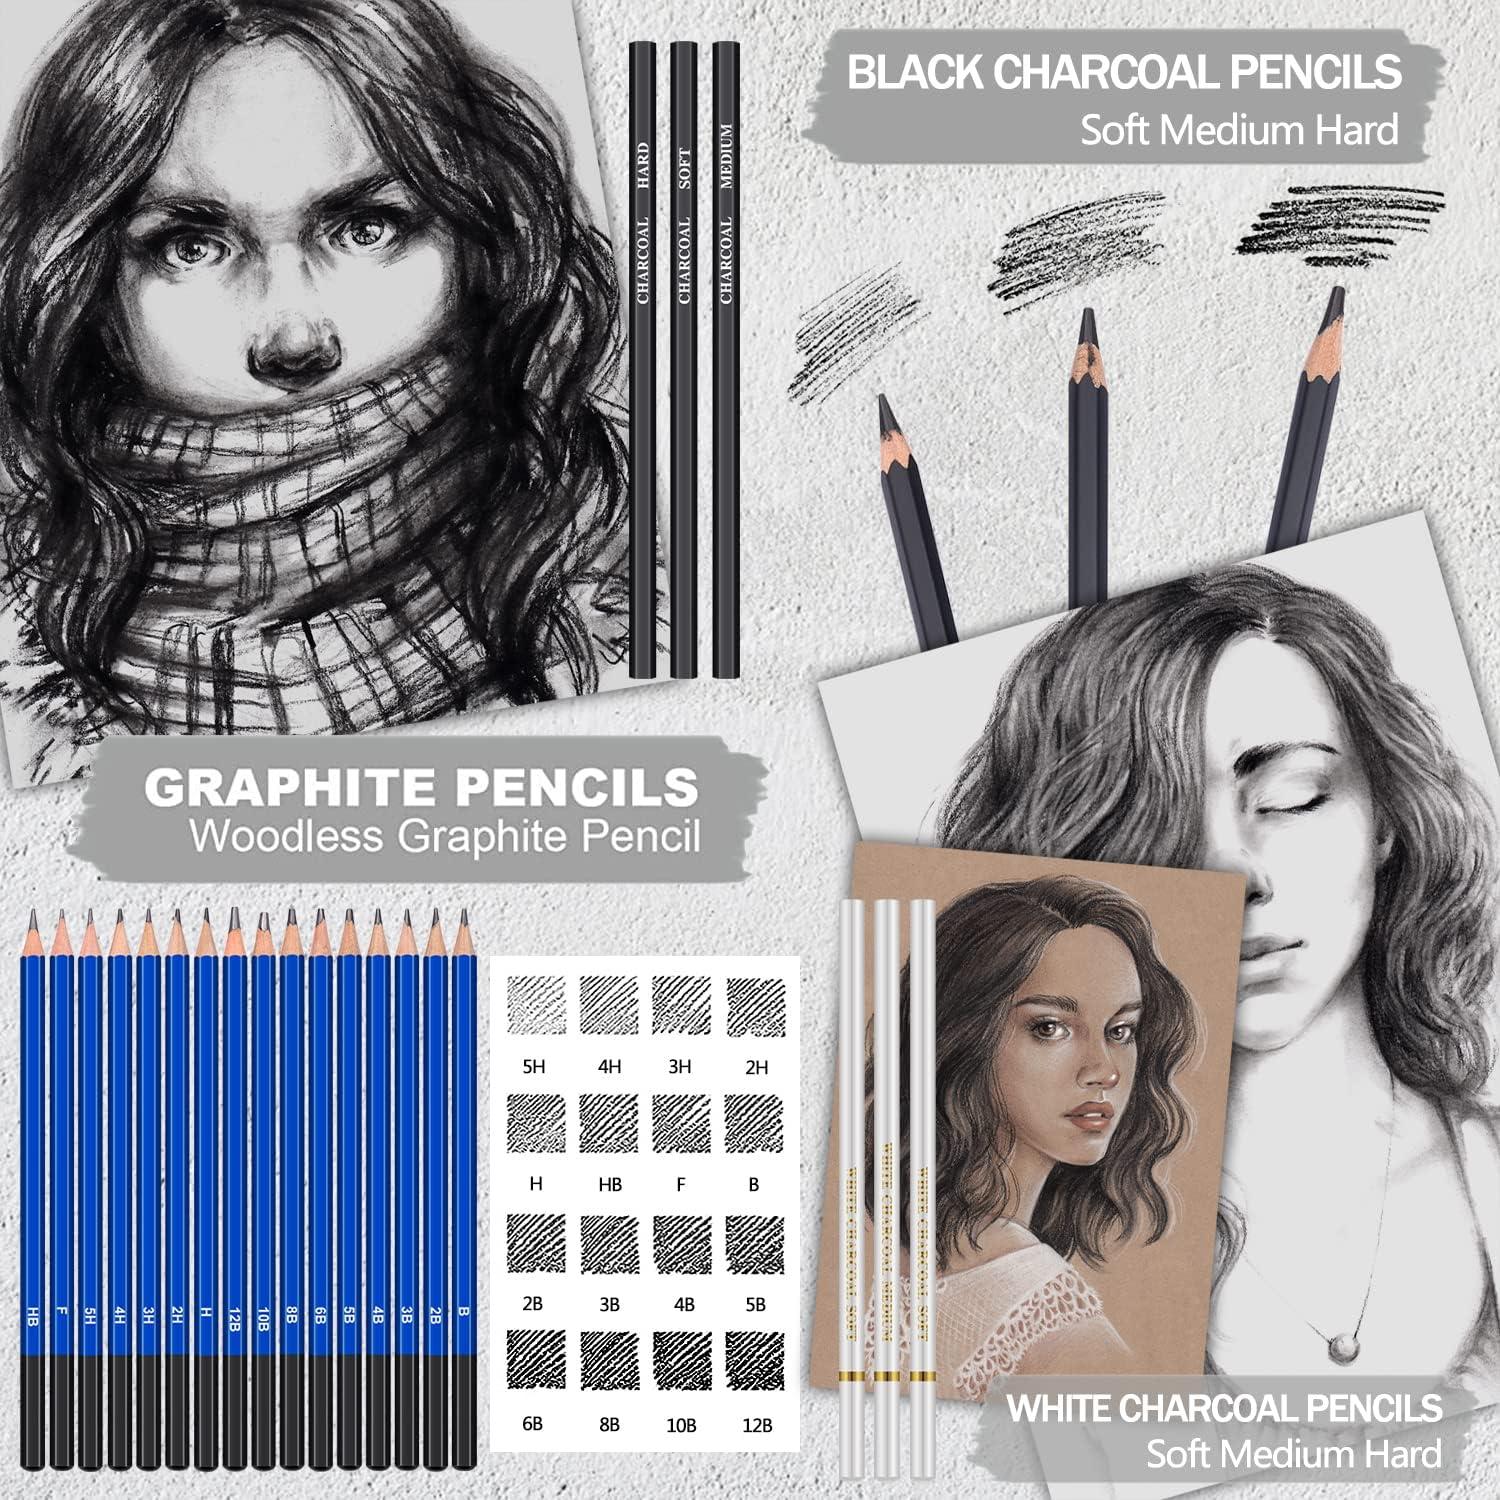 PANDAFLY Professional Charcoal Pencils Drawing Set - 8 Pieces Super Soft,  Soft, Medium and Hard Charcoal Pencils for Drawing, Sketching, Shading, Artist  Pencils for Beginners & Artists 